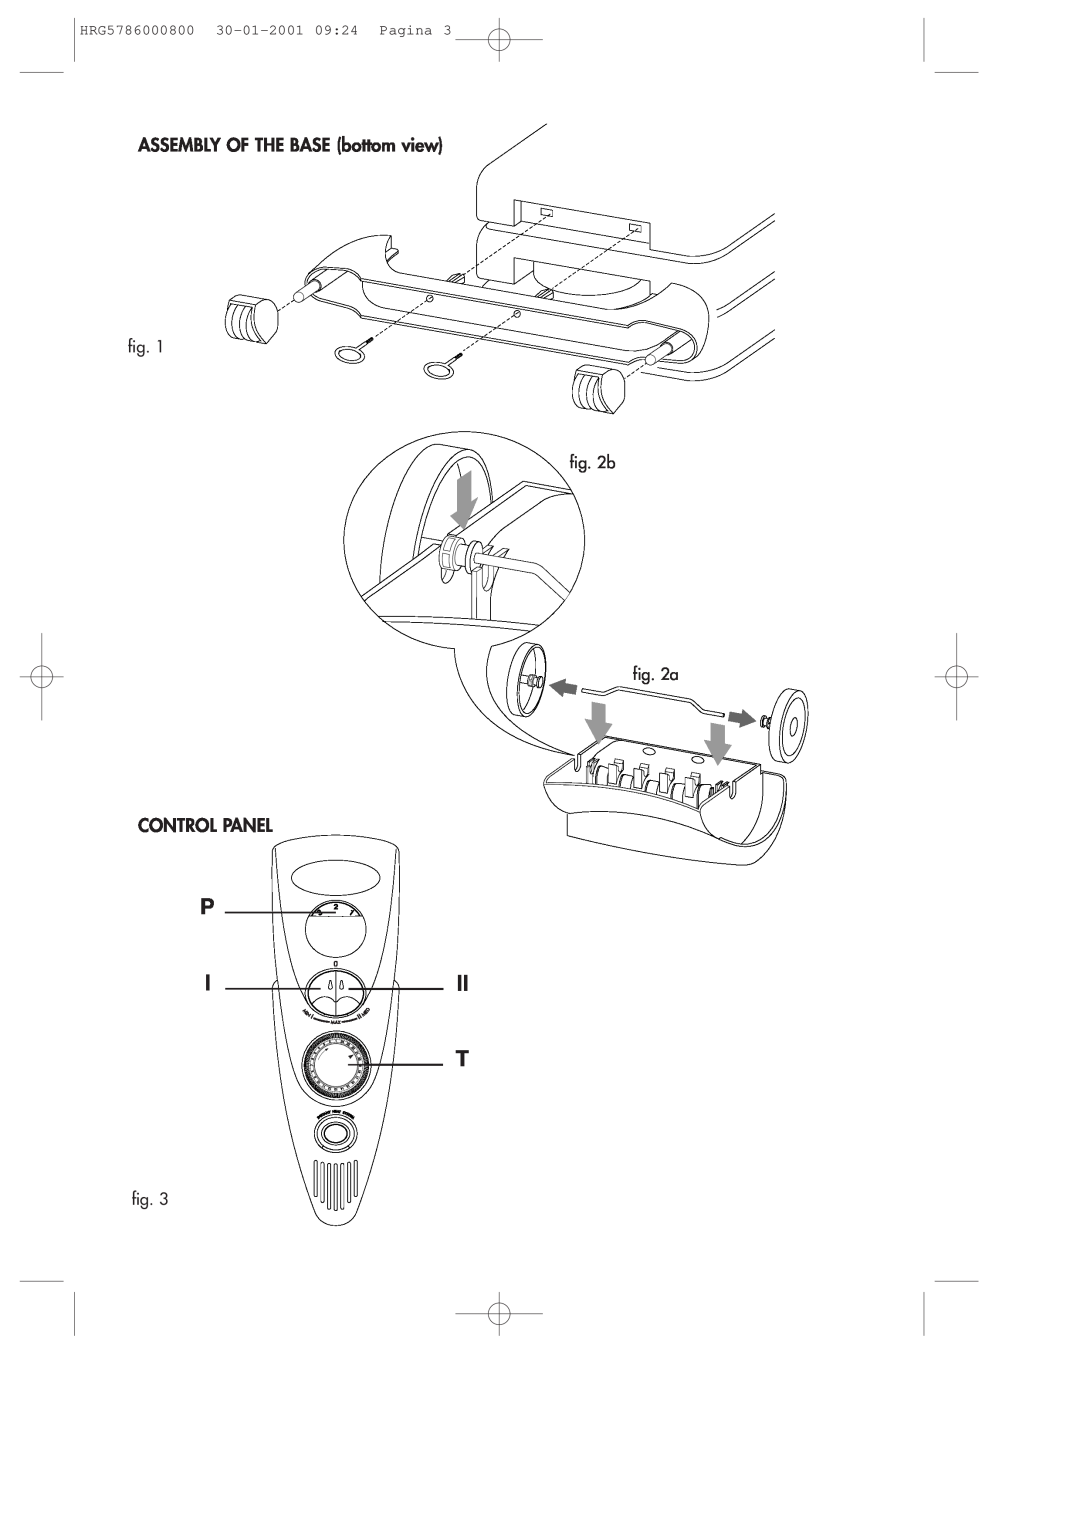 DeLonghi DR18TG manual ASSEMBLY OF THE BASE bottom view, Control Panel, Ii T, HRG5786000800 30-01-200109 24 Pagina 